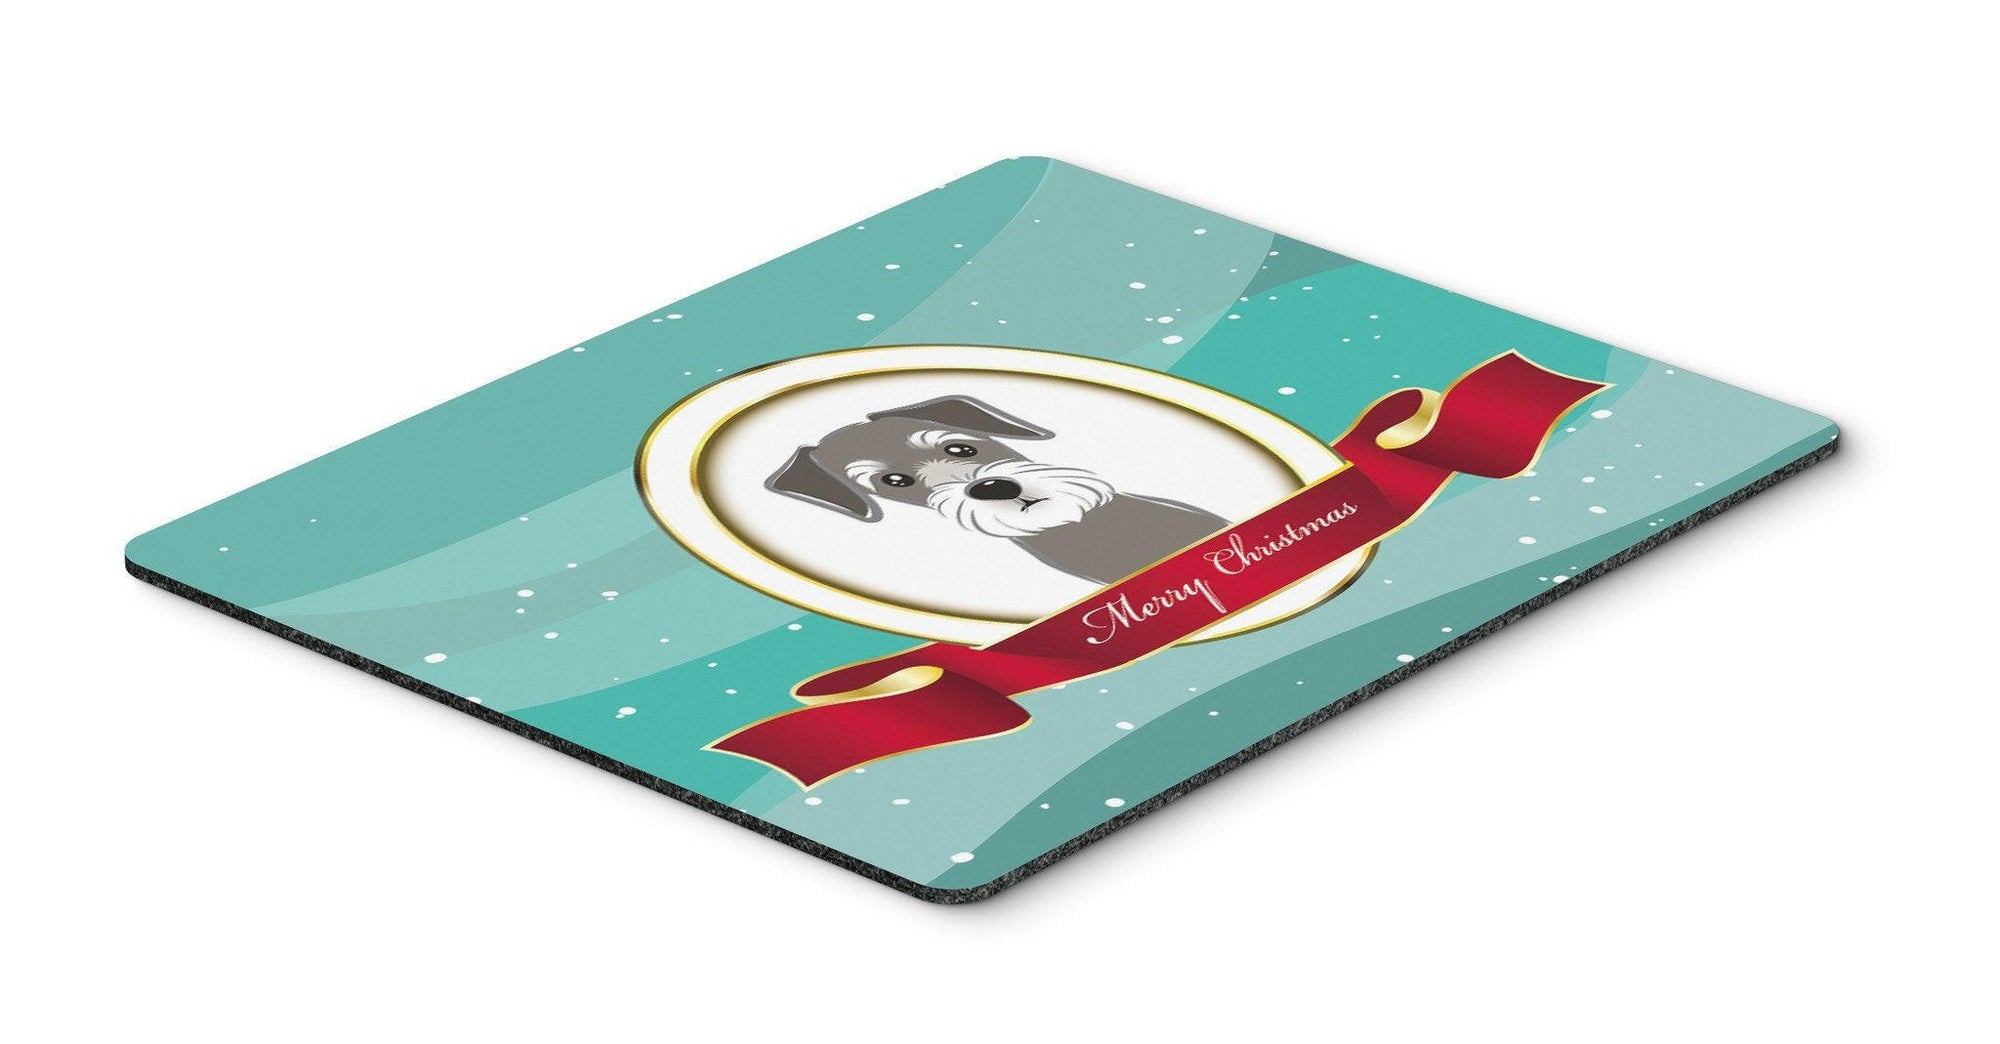 Schnauzer Merry Christmas Mouse Pad, Hot Pad or Trivet BB1516MP by Caroline's Treasures